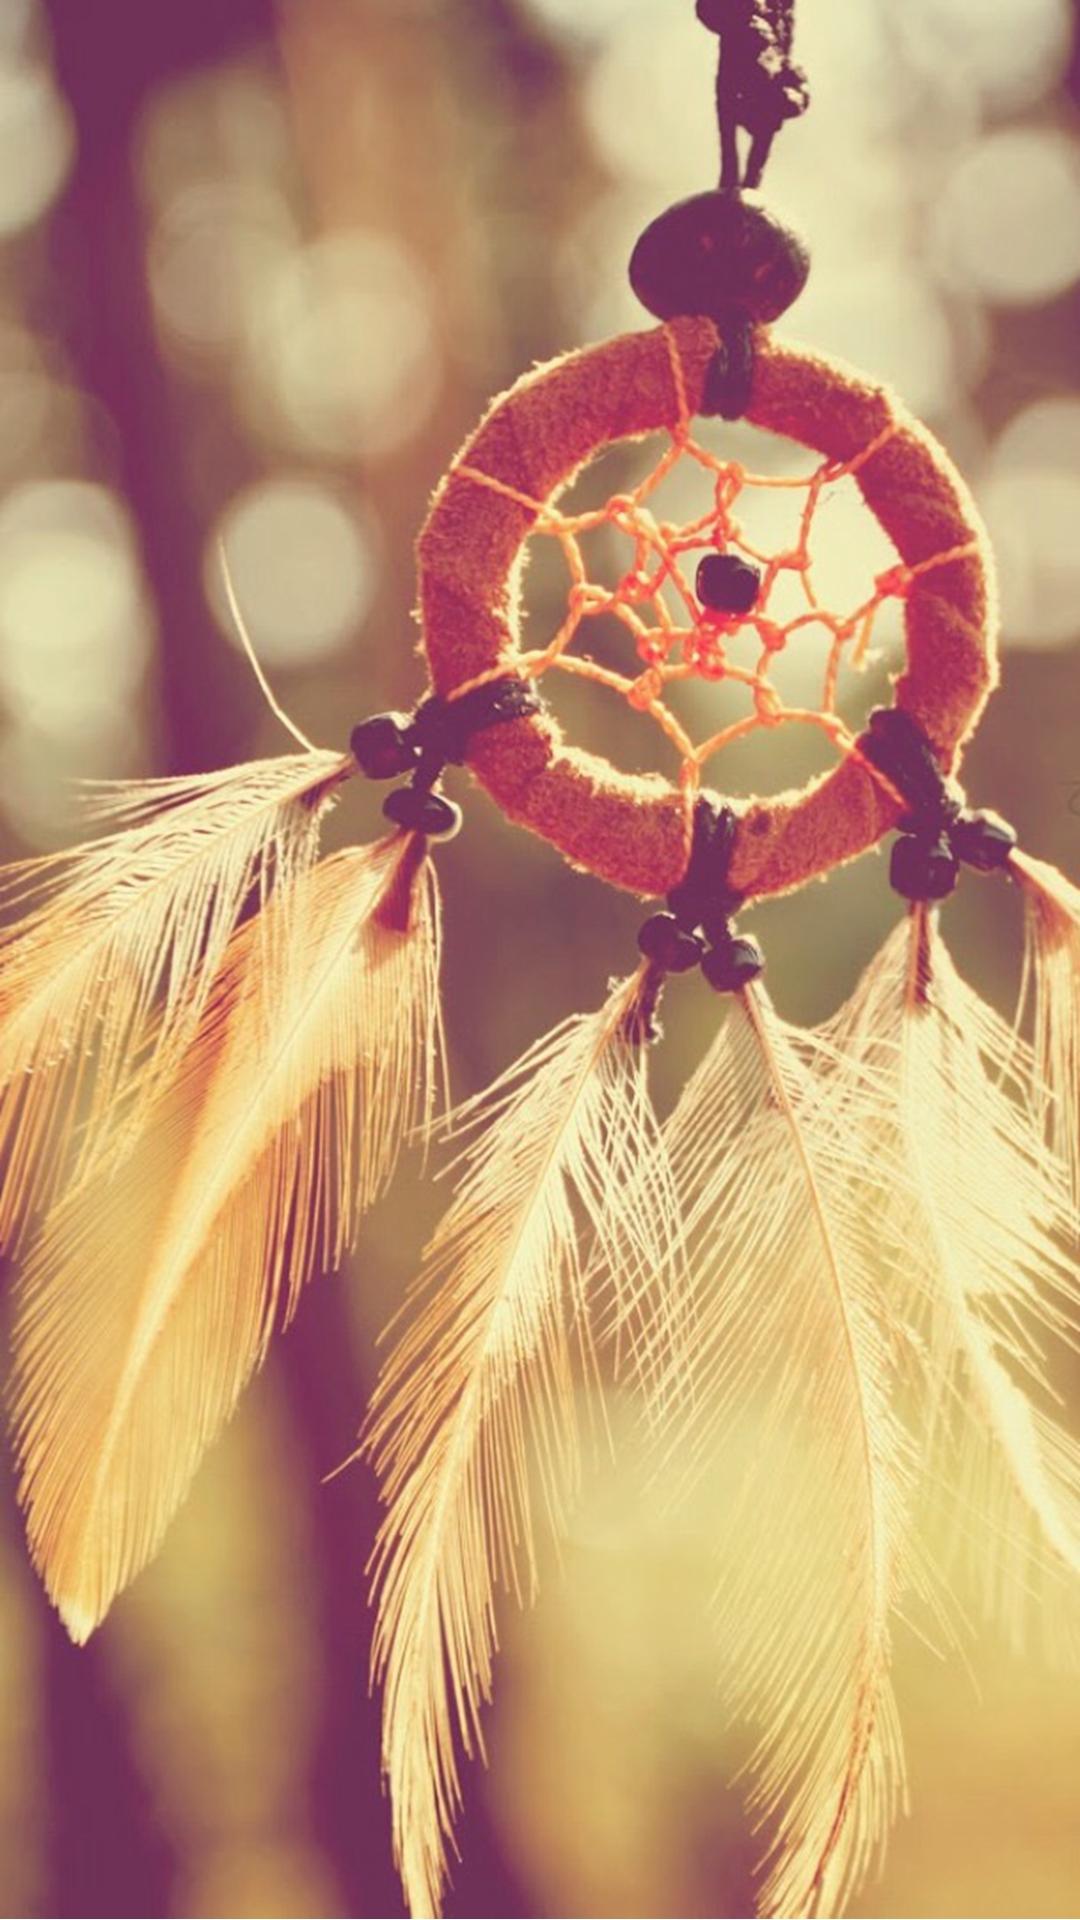 Dreamcatcher Feathers Closeup iPhone 8 Wallpaper Free Download